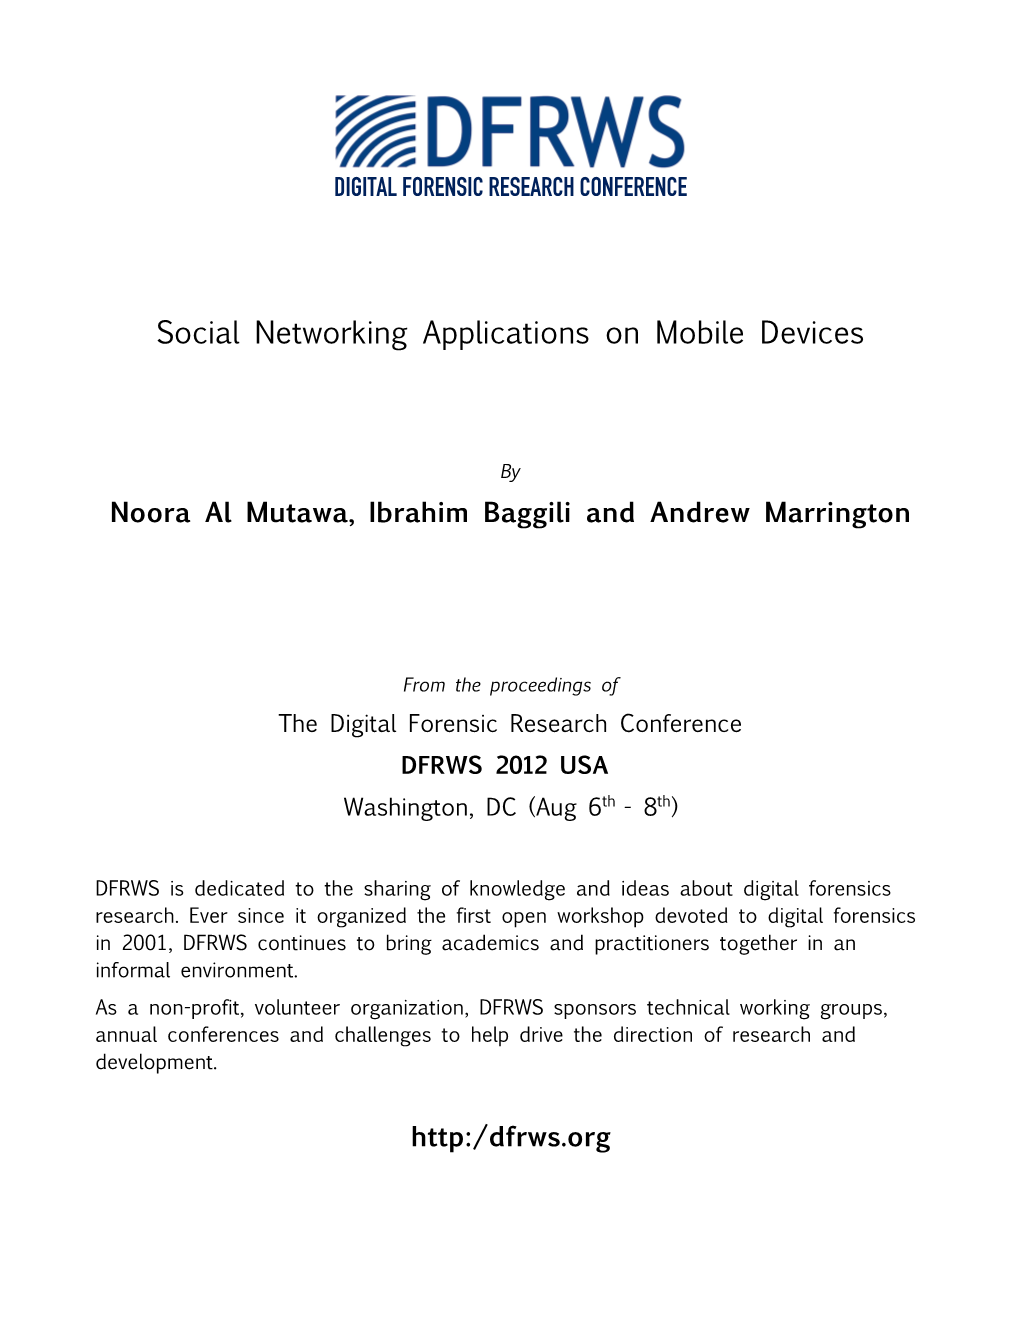 Social Networking Applications on Mobile Devices